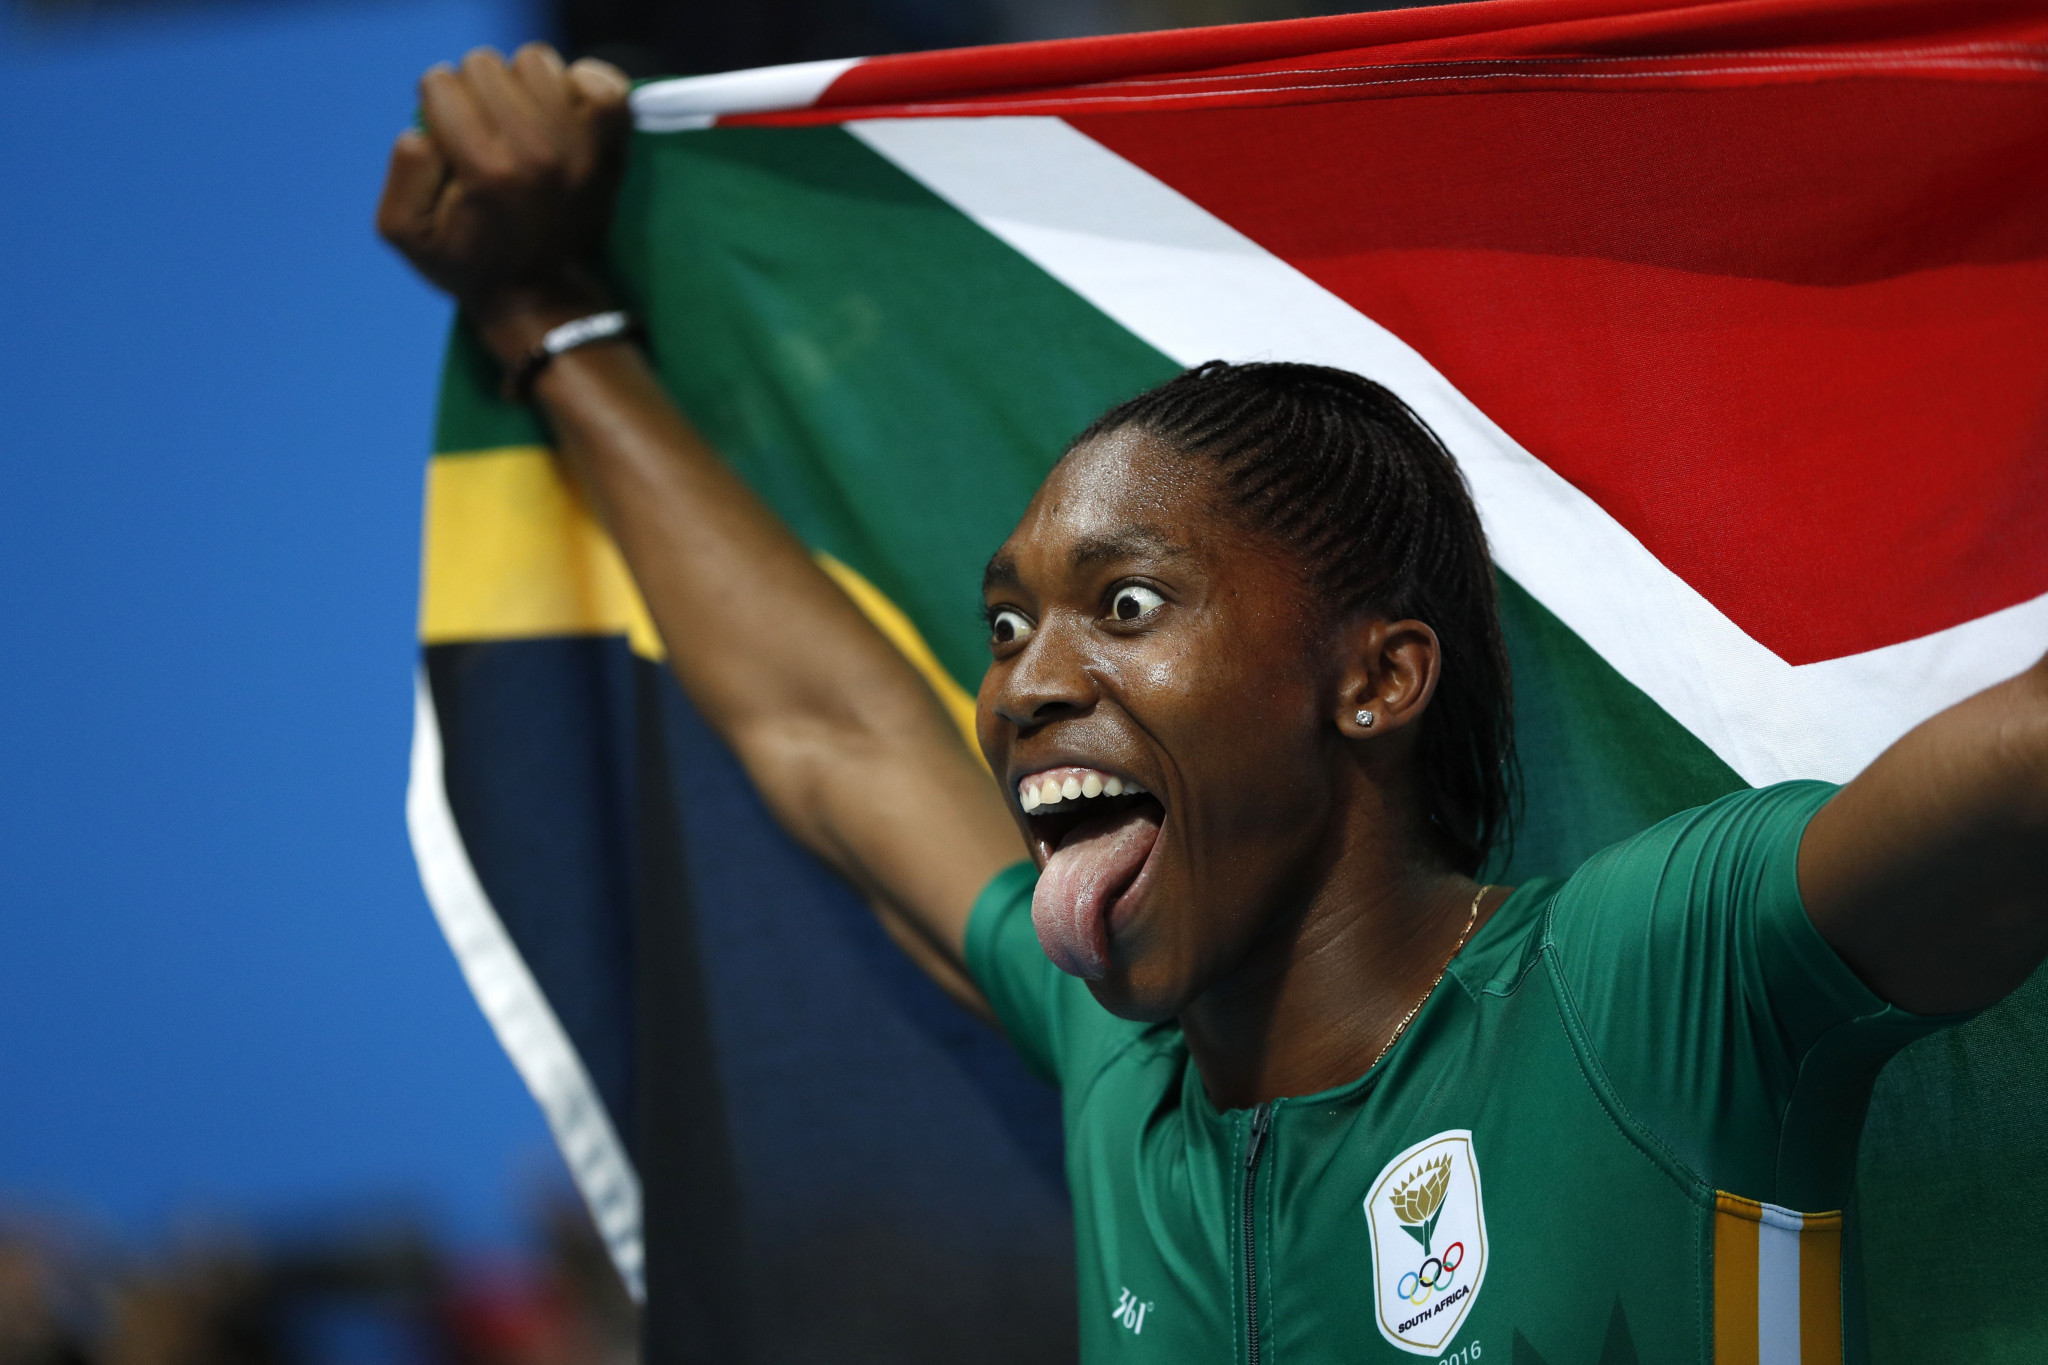 Double Olympic 800m gold medallist Caster Semenya has spoken of her mental anguish at being denied the opportunity by World Athletics to compete internationally at distances between 400m and the mile ©Getty Images